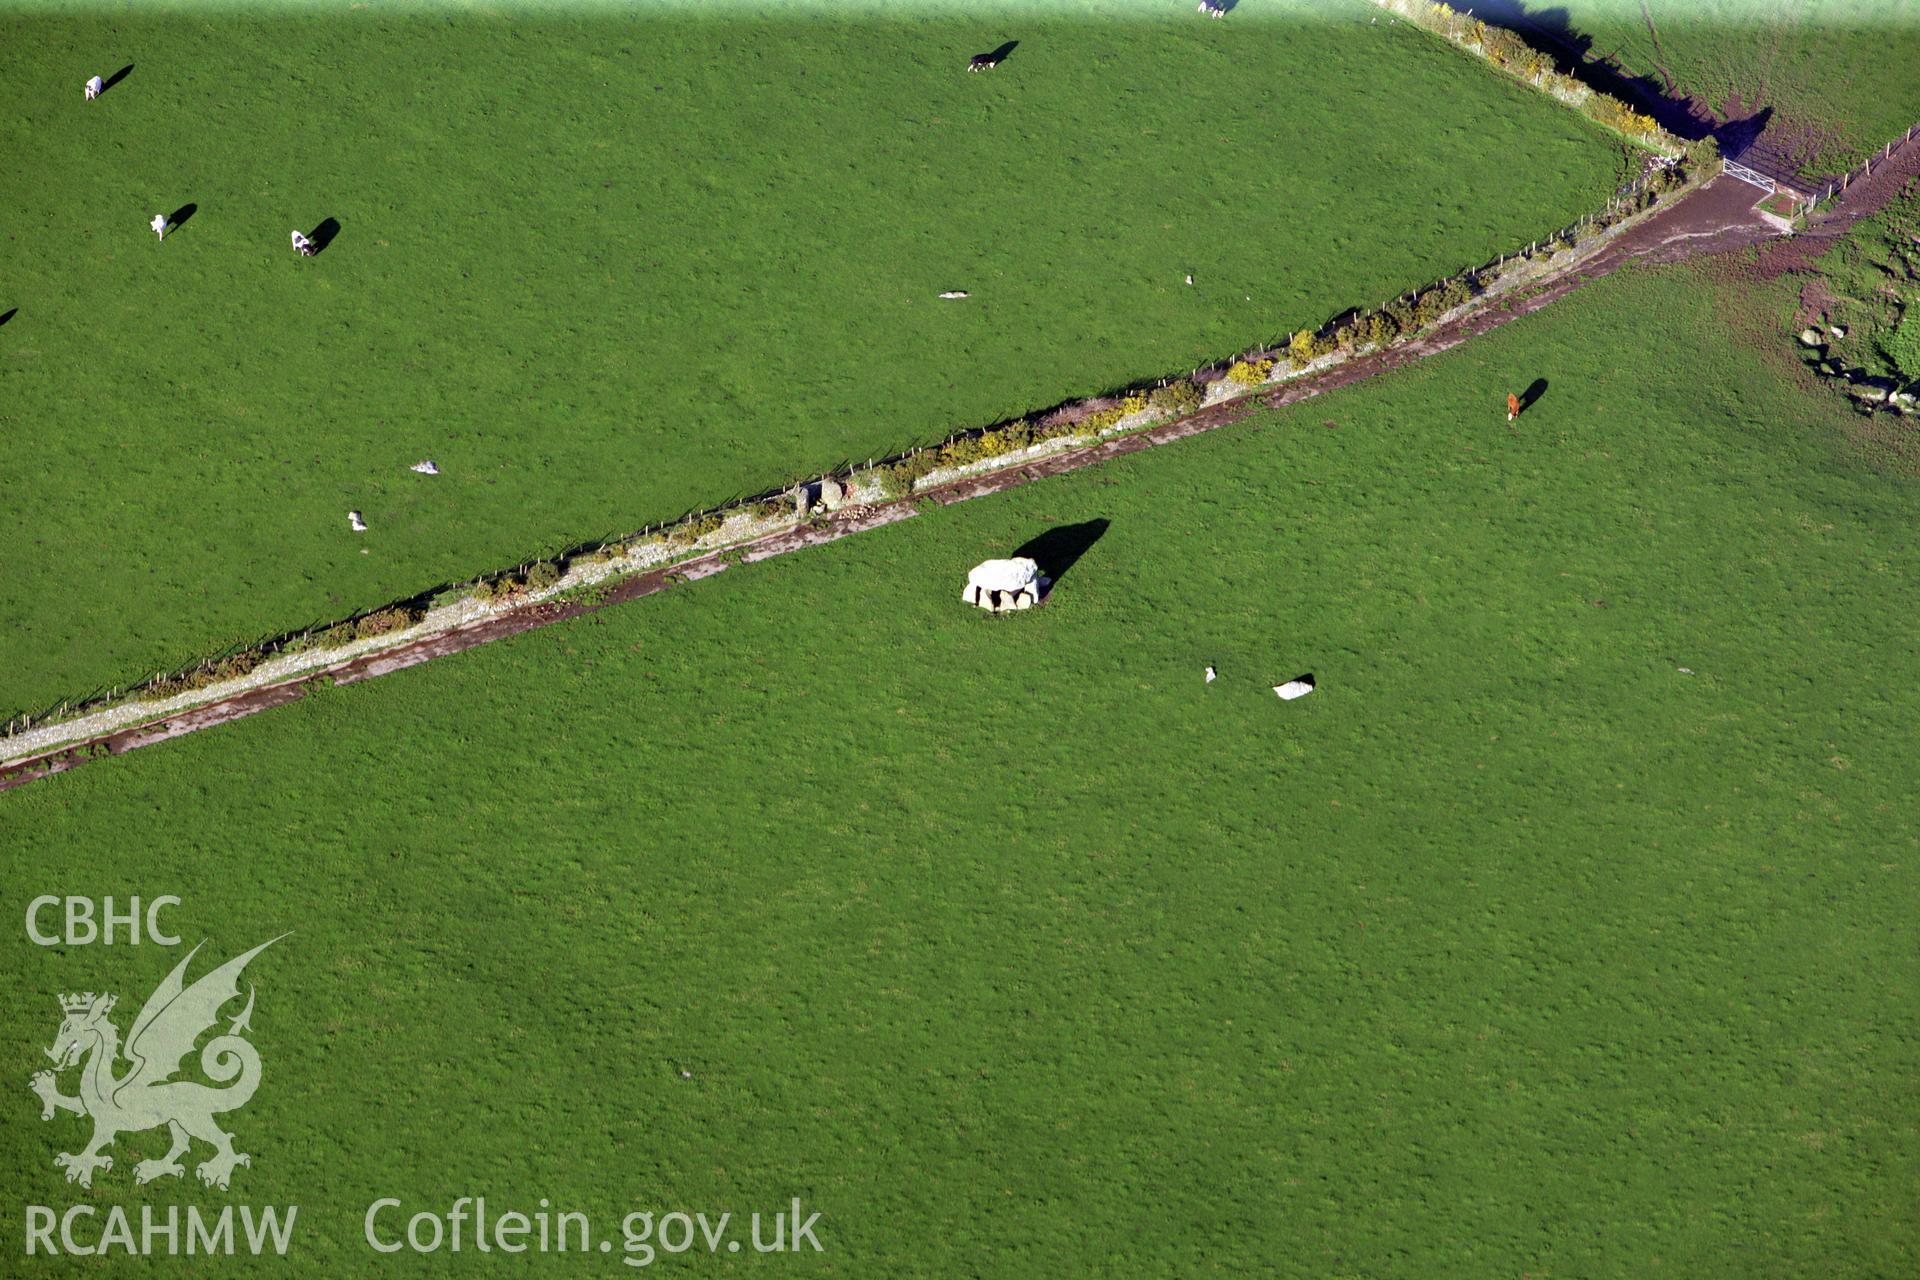 RCAHMW colour oblique photograph of Carreg Sampson burial chamber. Taken by O. Davies & T. Driver on 22/11/2013.